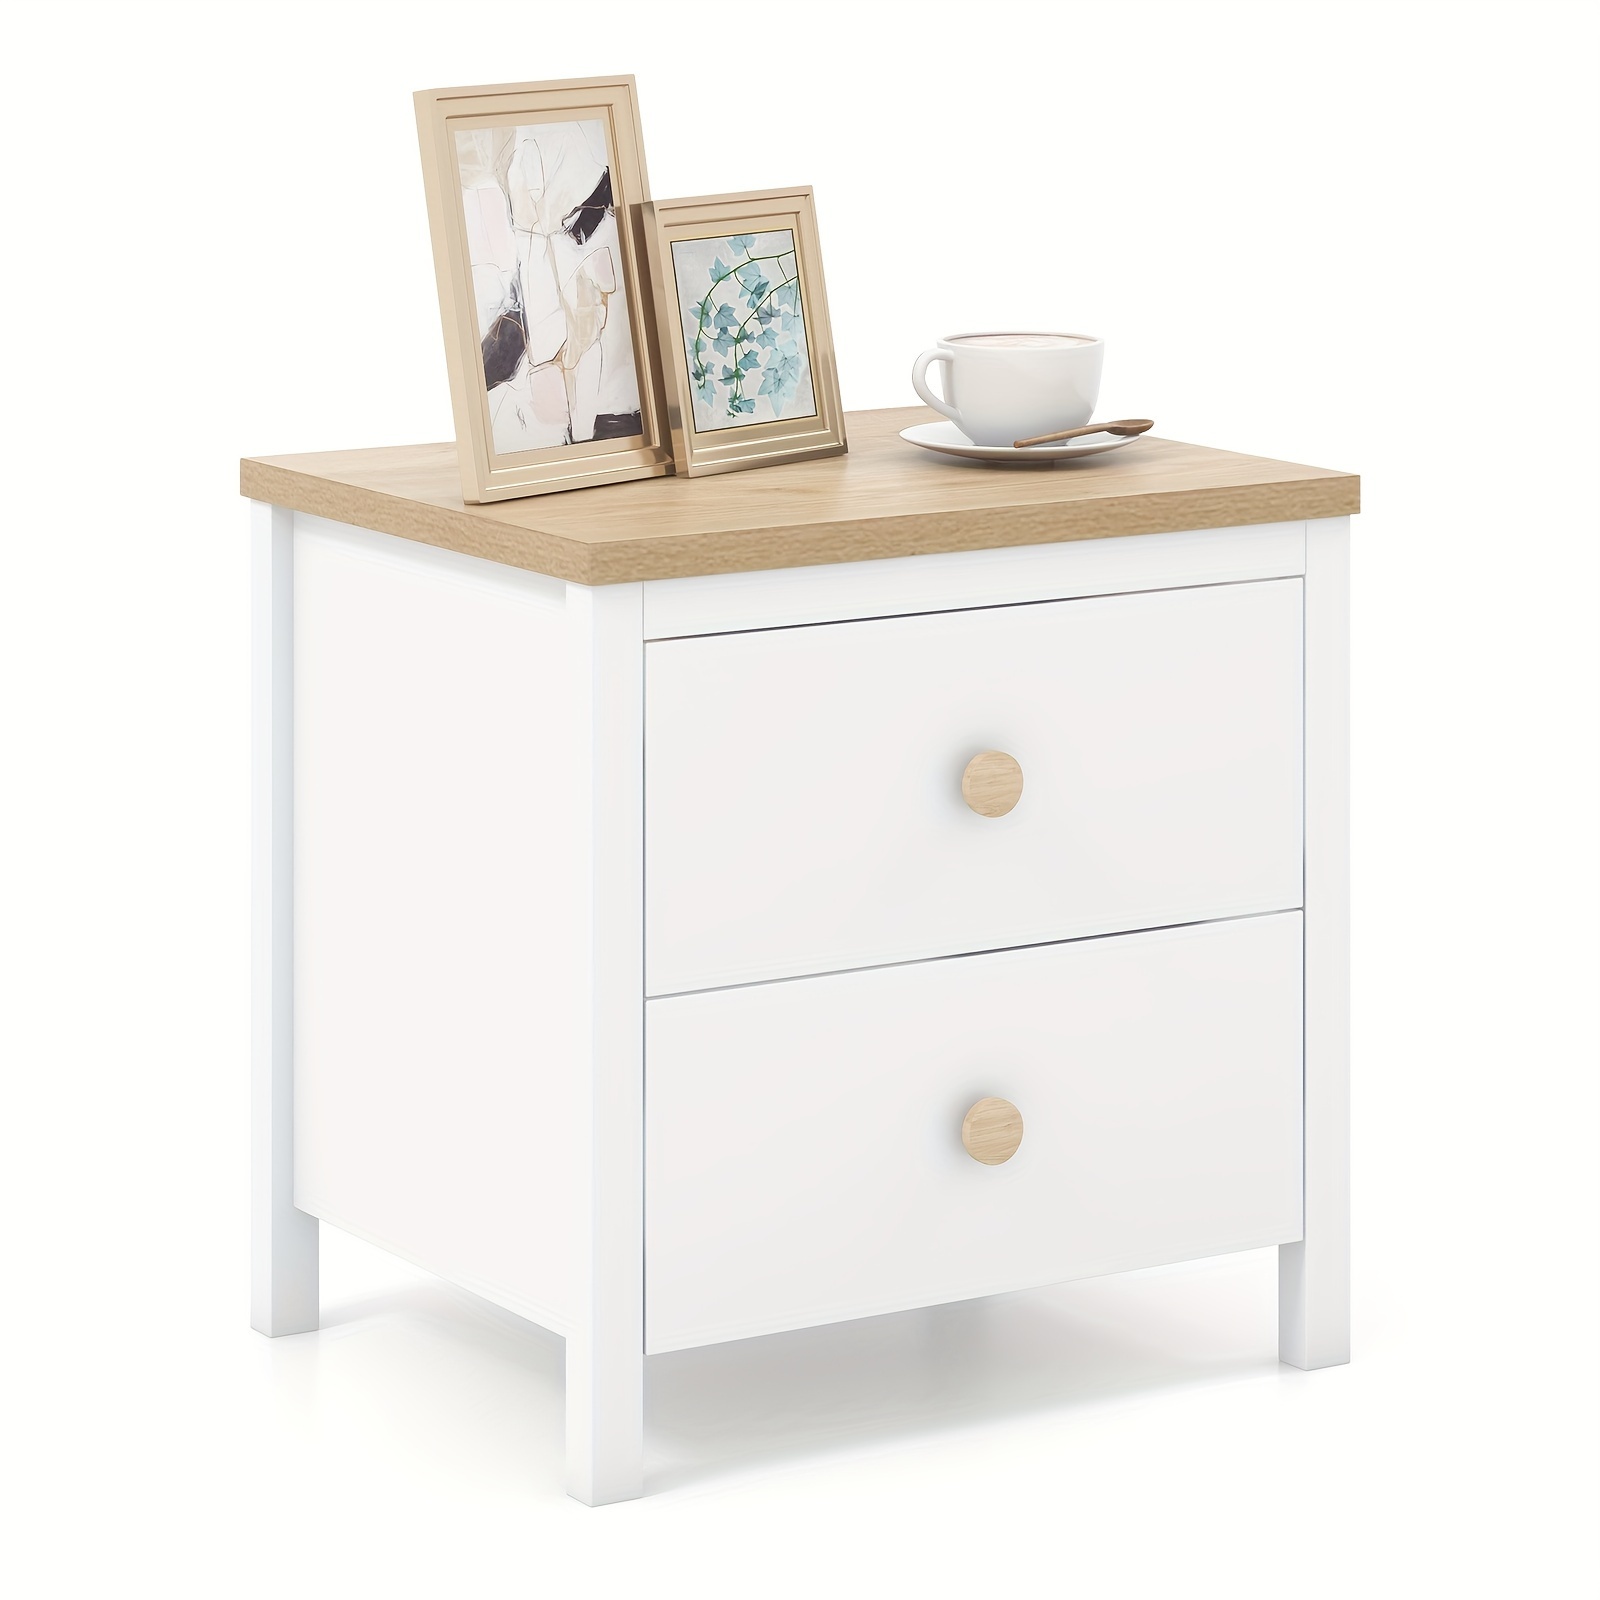 

1pc Nightstand With 2 Drawers, Farmhouse End Table With Solid Wood Legs, Compact Wooden Accent Coffee Table, Home Bedside Table, Multifunctional Sofa Side Table For Living Room, Bedroom, White